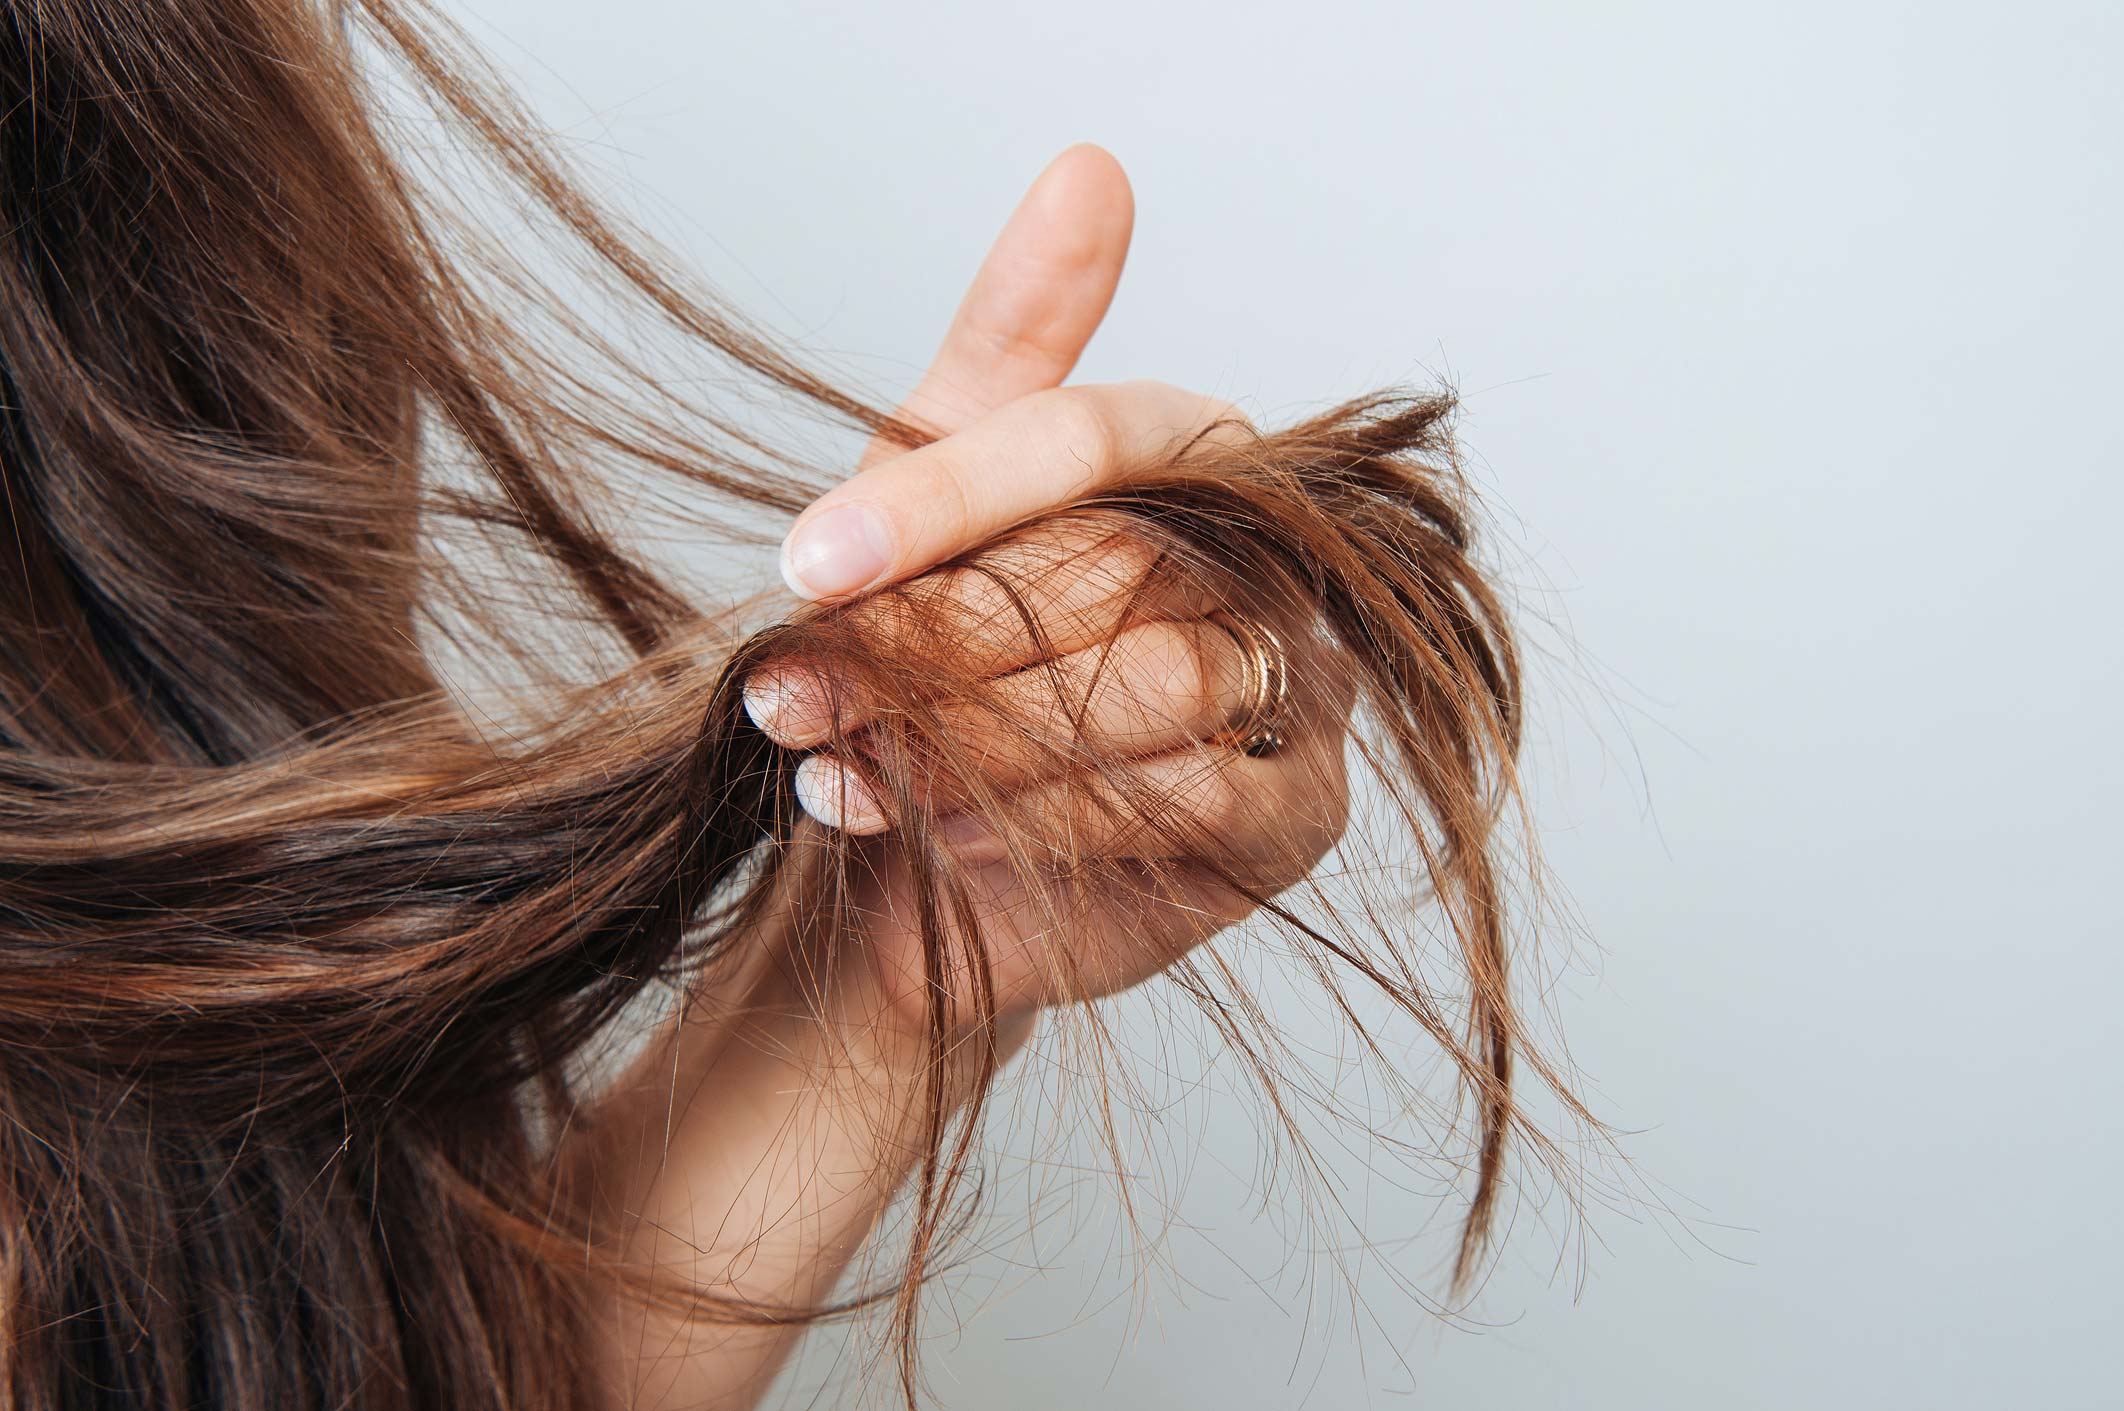 How to Take Care of Your Hair and Nail Health